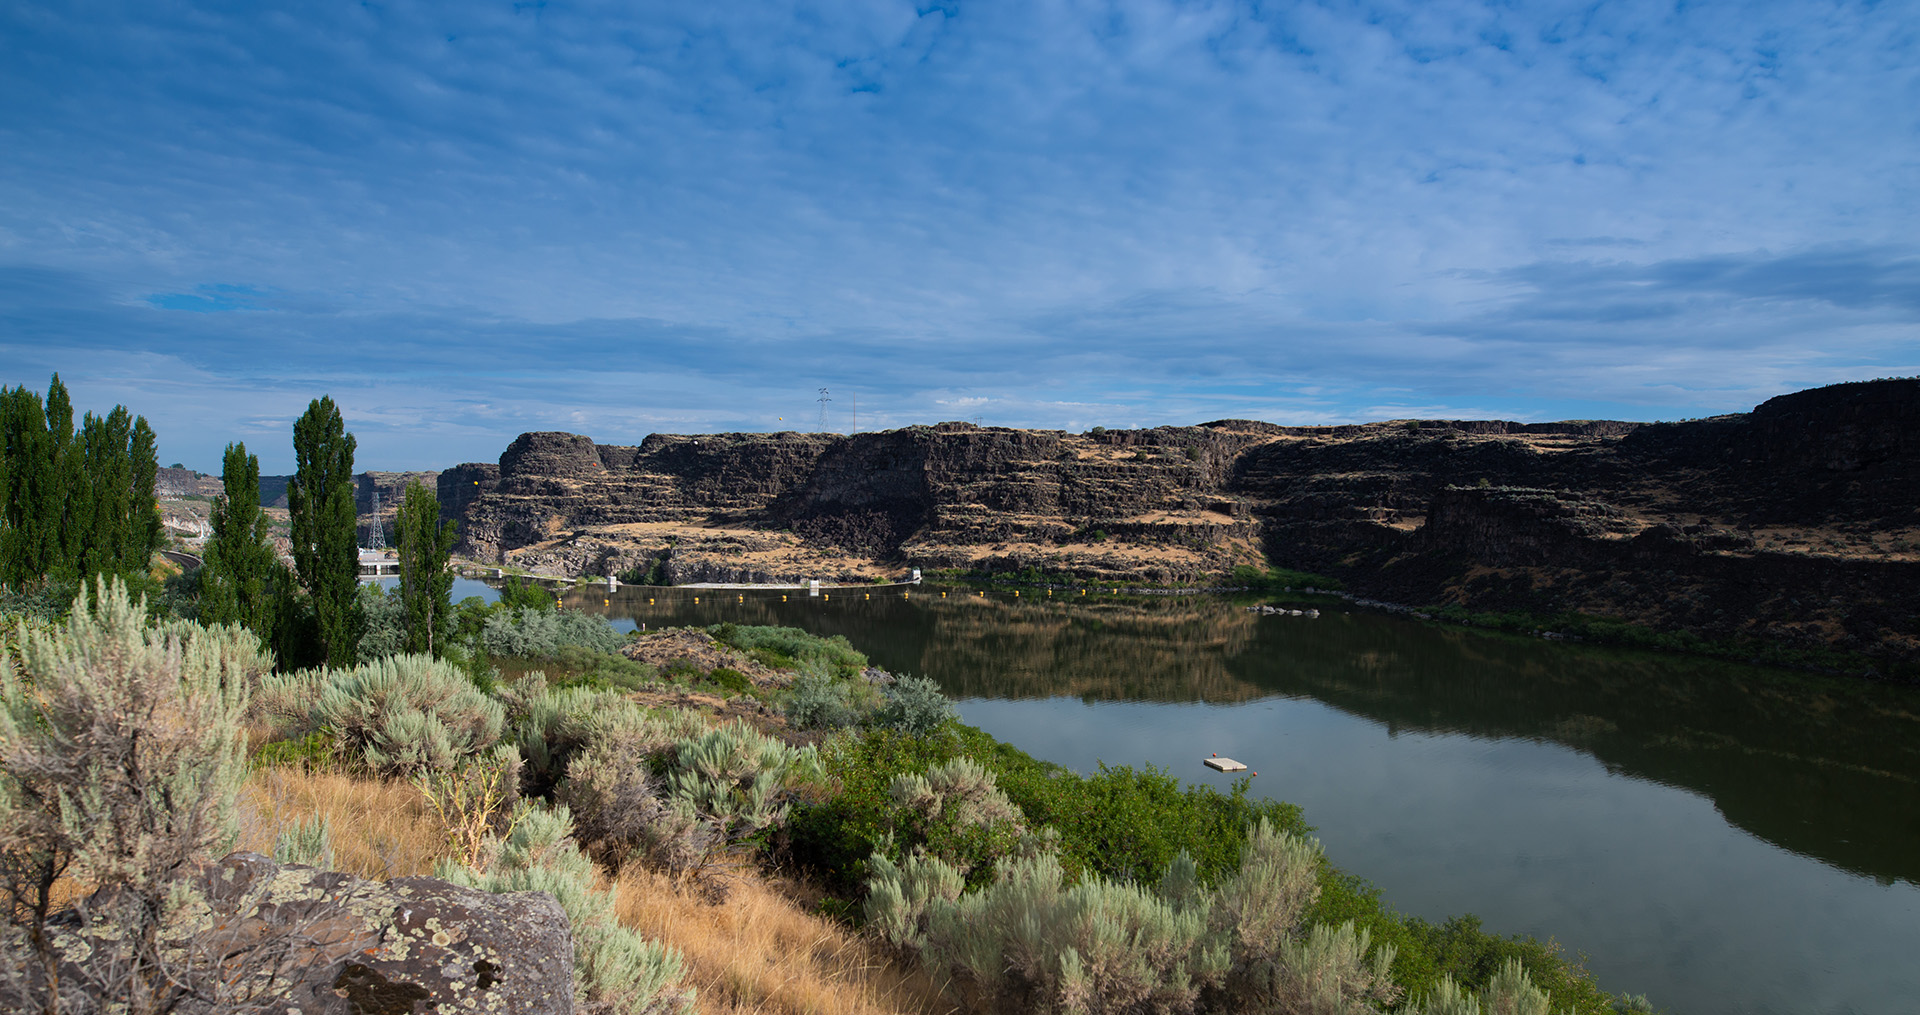 Image of reservoir water and scenic Idaho landscape